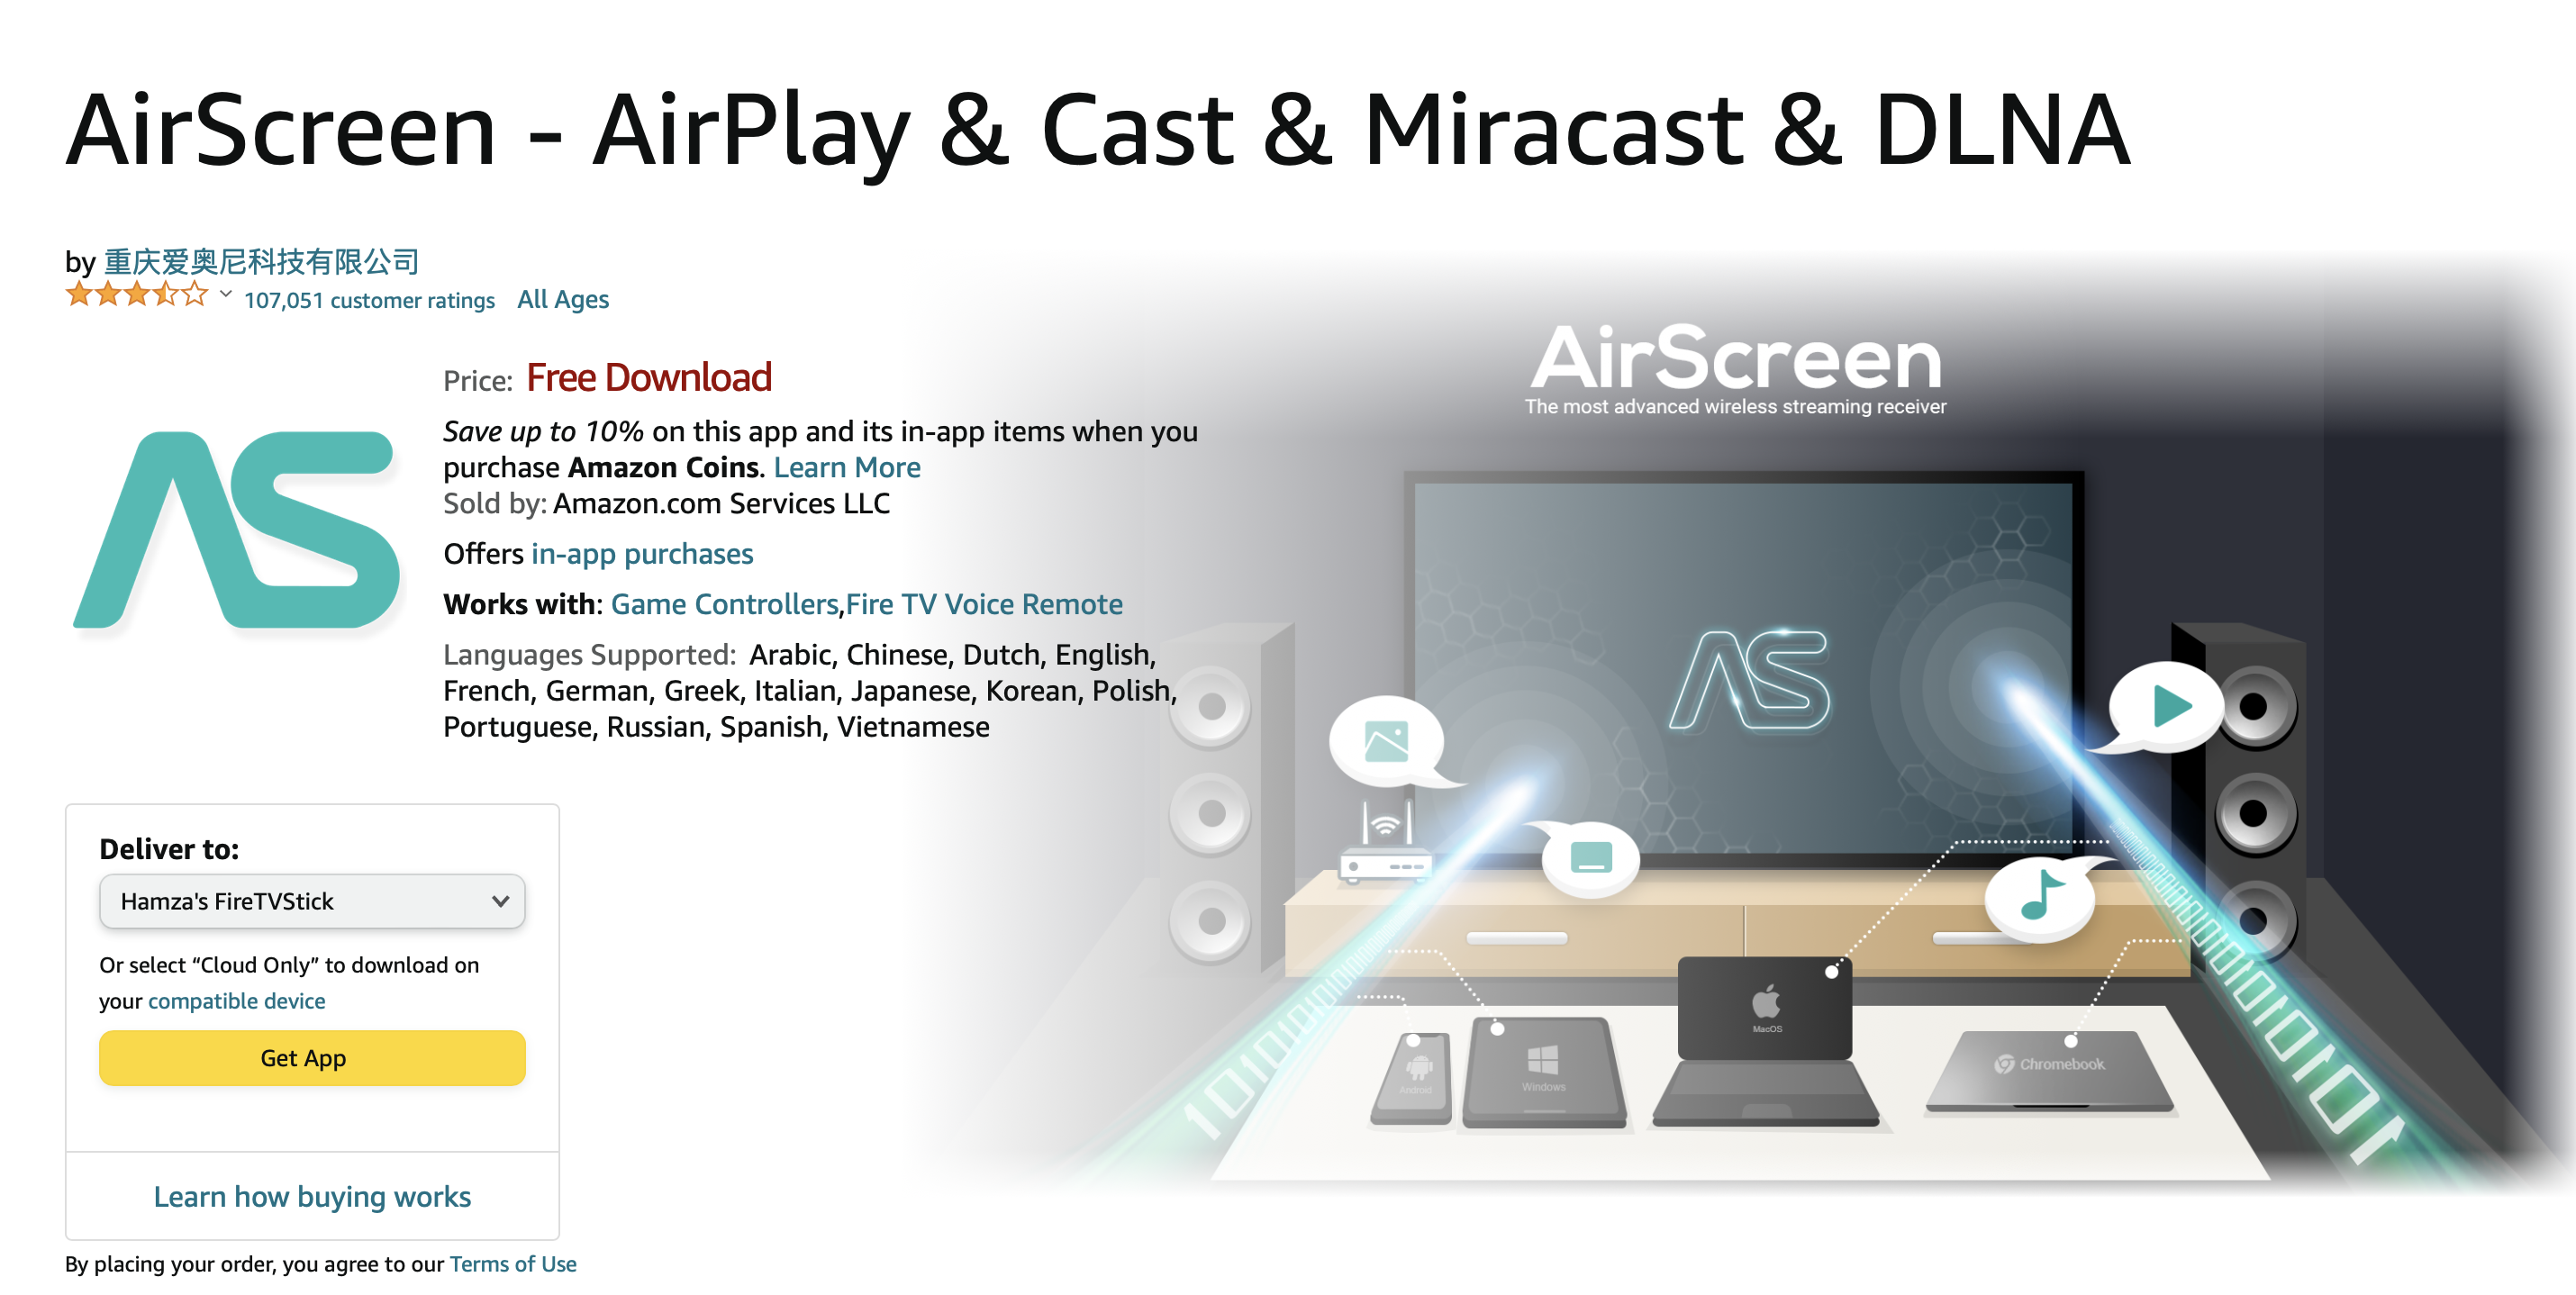 Transferring AirScreen to Firestick from the official Amazon site